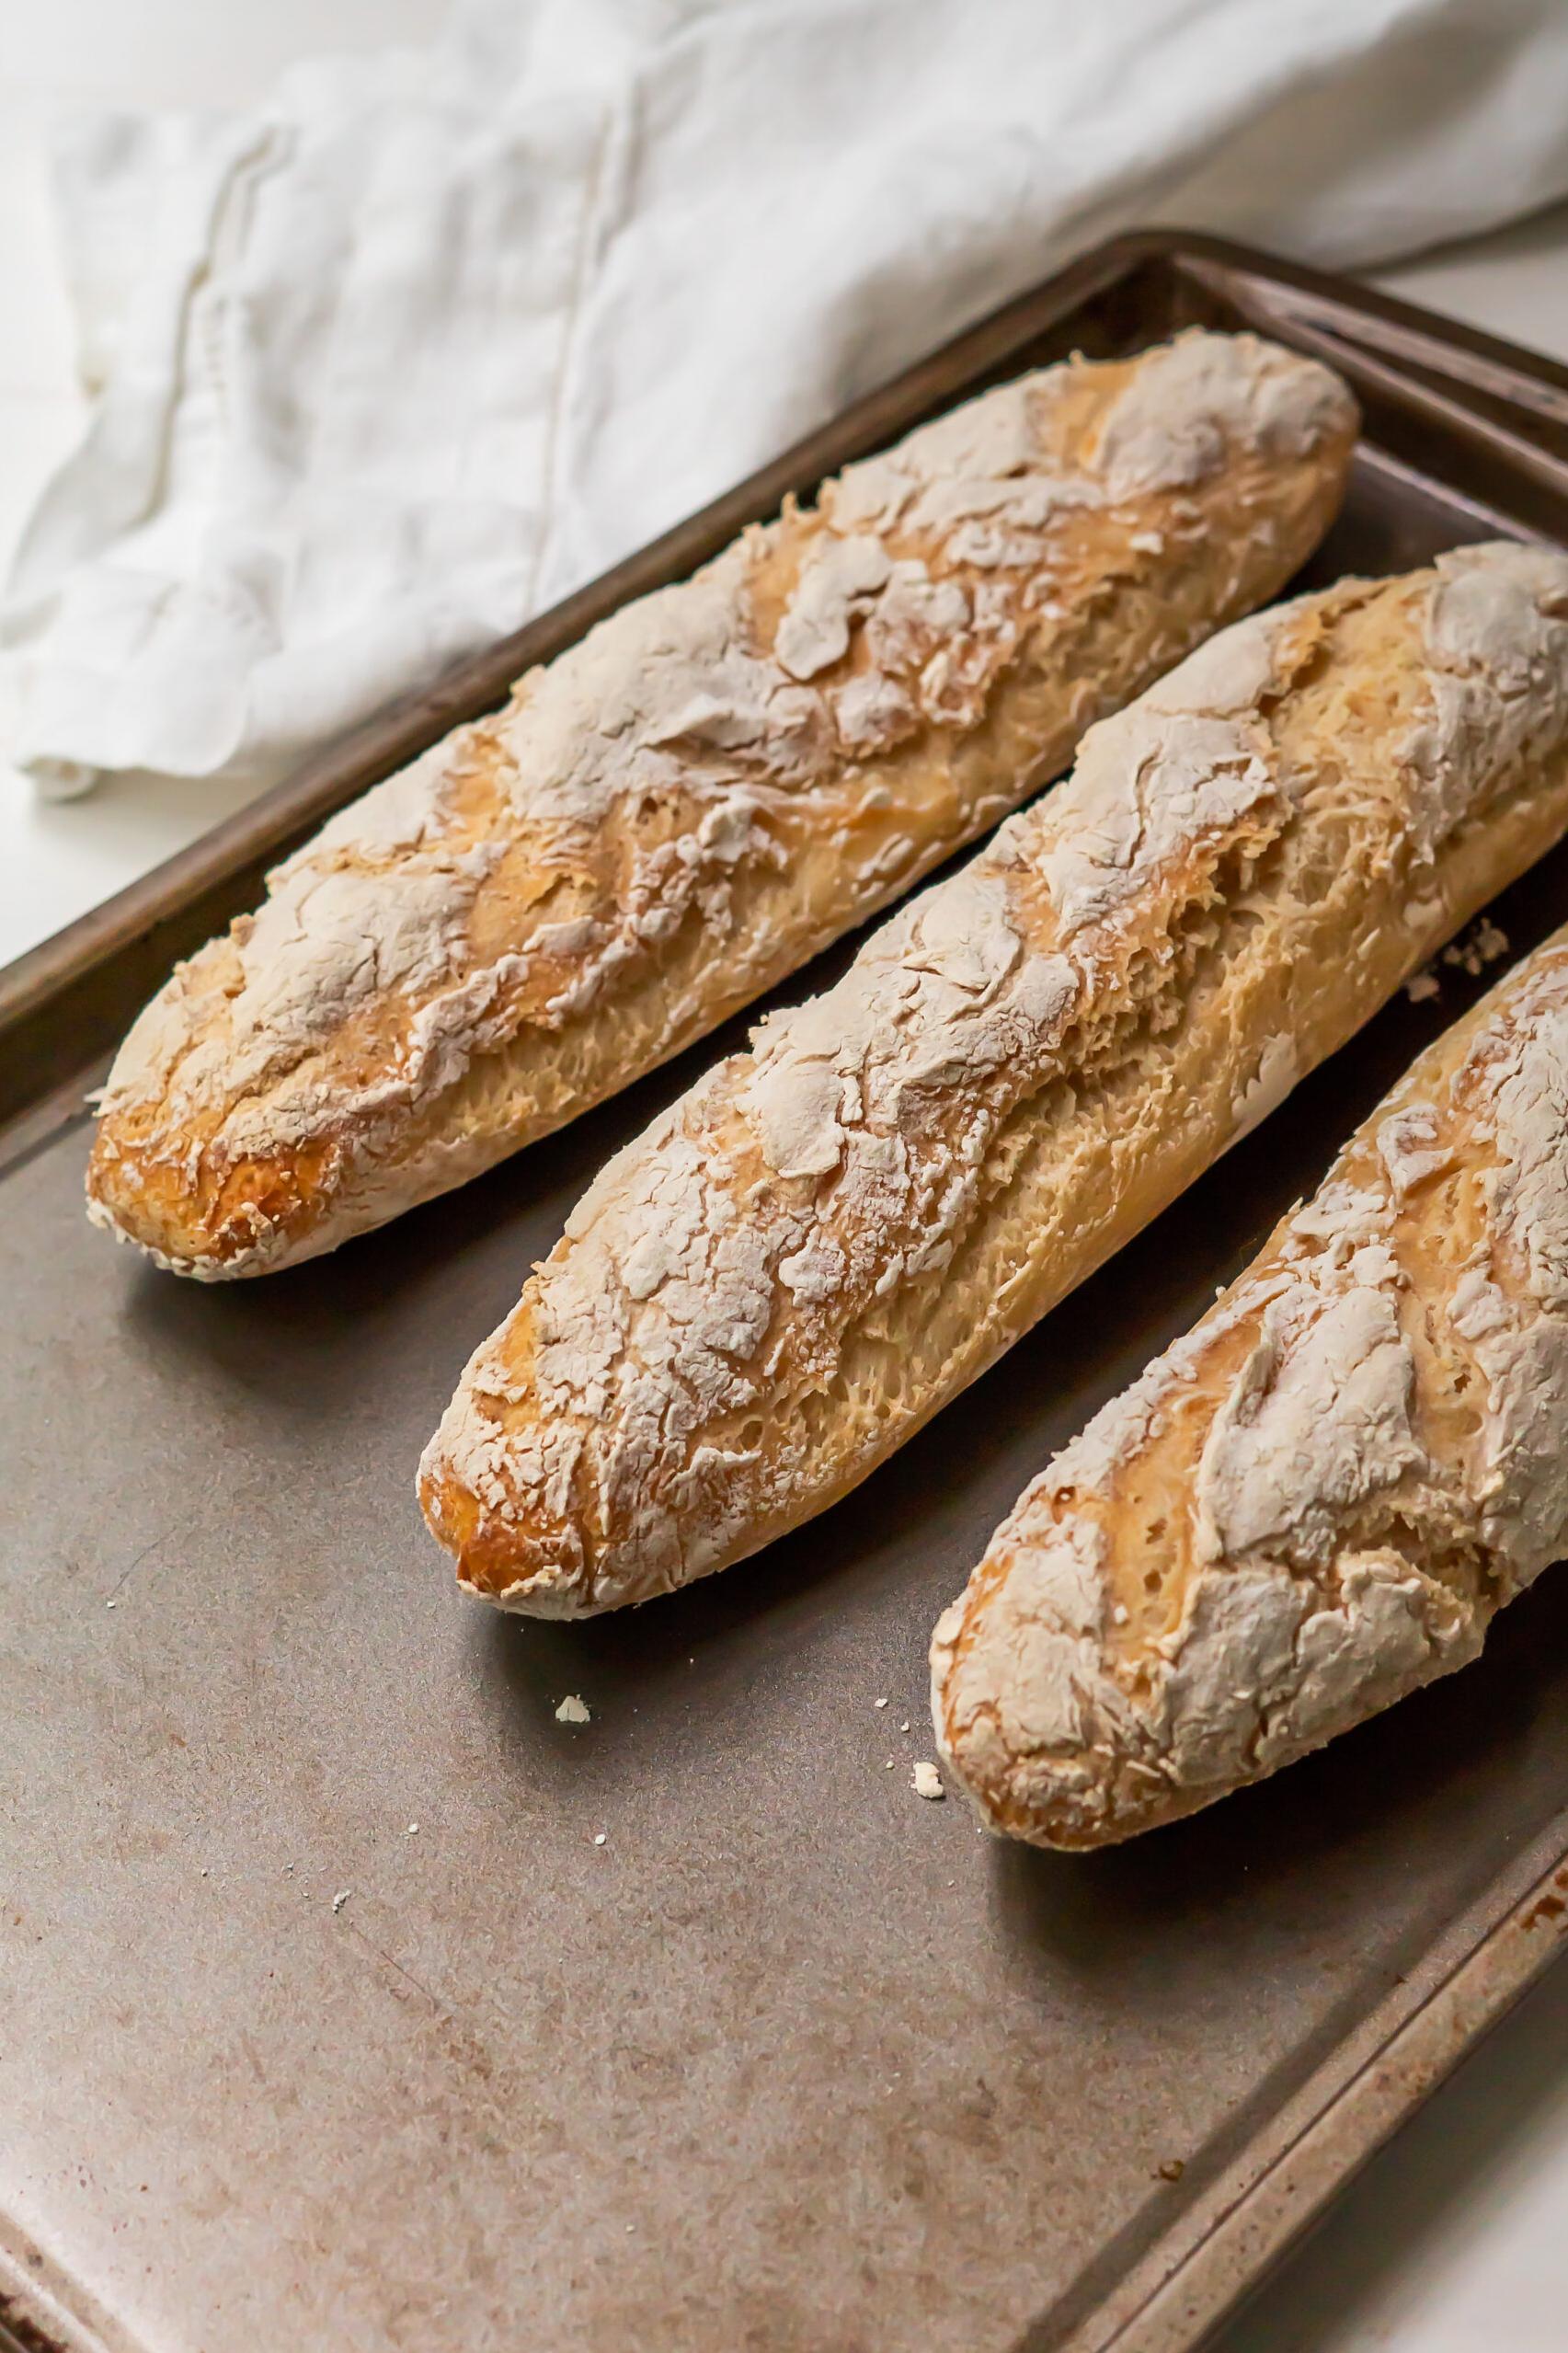  Not only is this bread tasty, but it's also packed with wholesome ingredients to keep you feeling good.